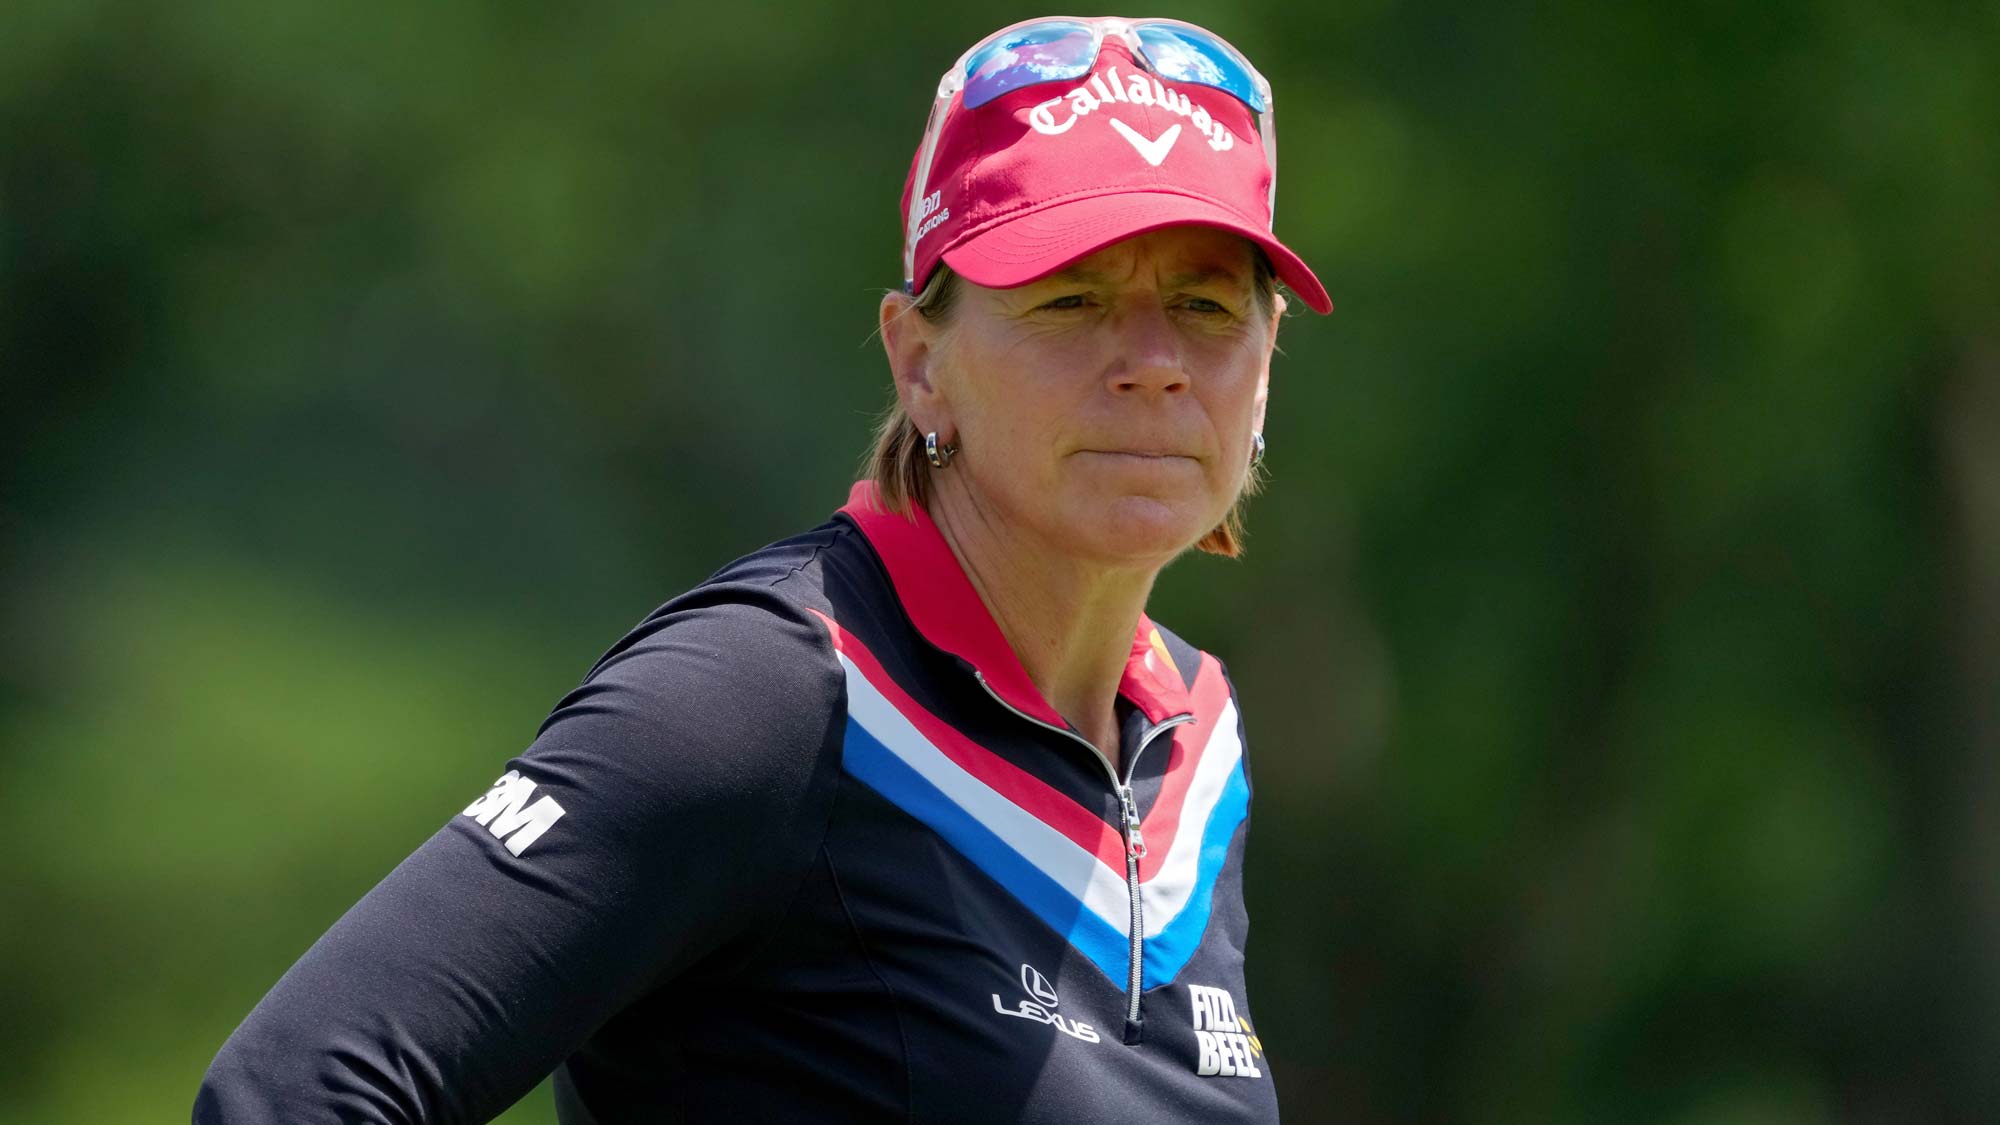 Annika Sorenstam of Sweden looks on from the eighth green during the second round of the Dow Great Lakes Bay Invitational 